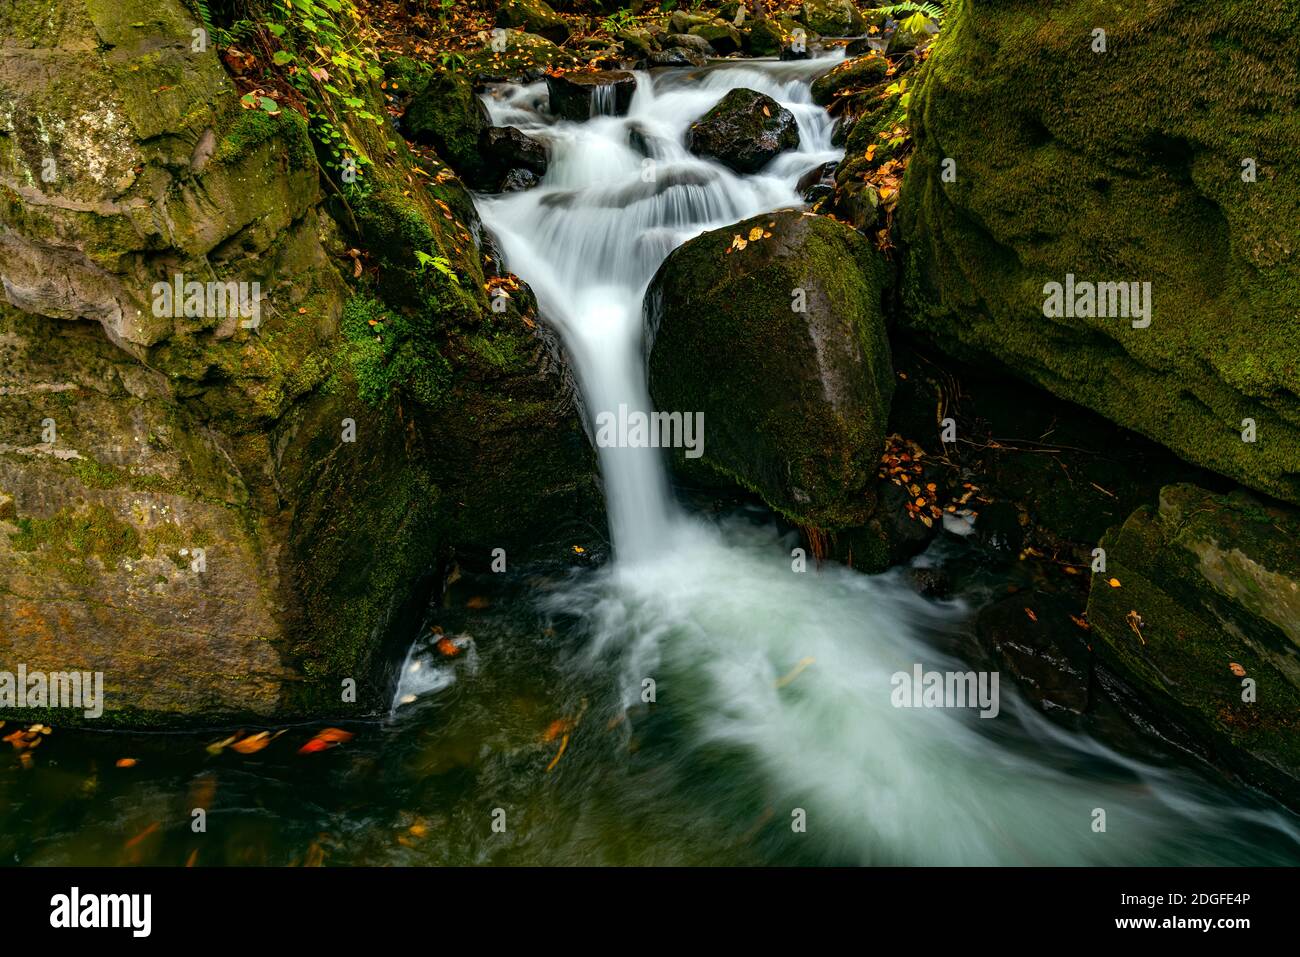 Oirase Mountain Stream flow passing green mossy rocks covered with colorful falling leaves Stock Photo